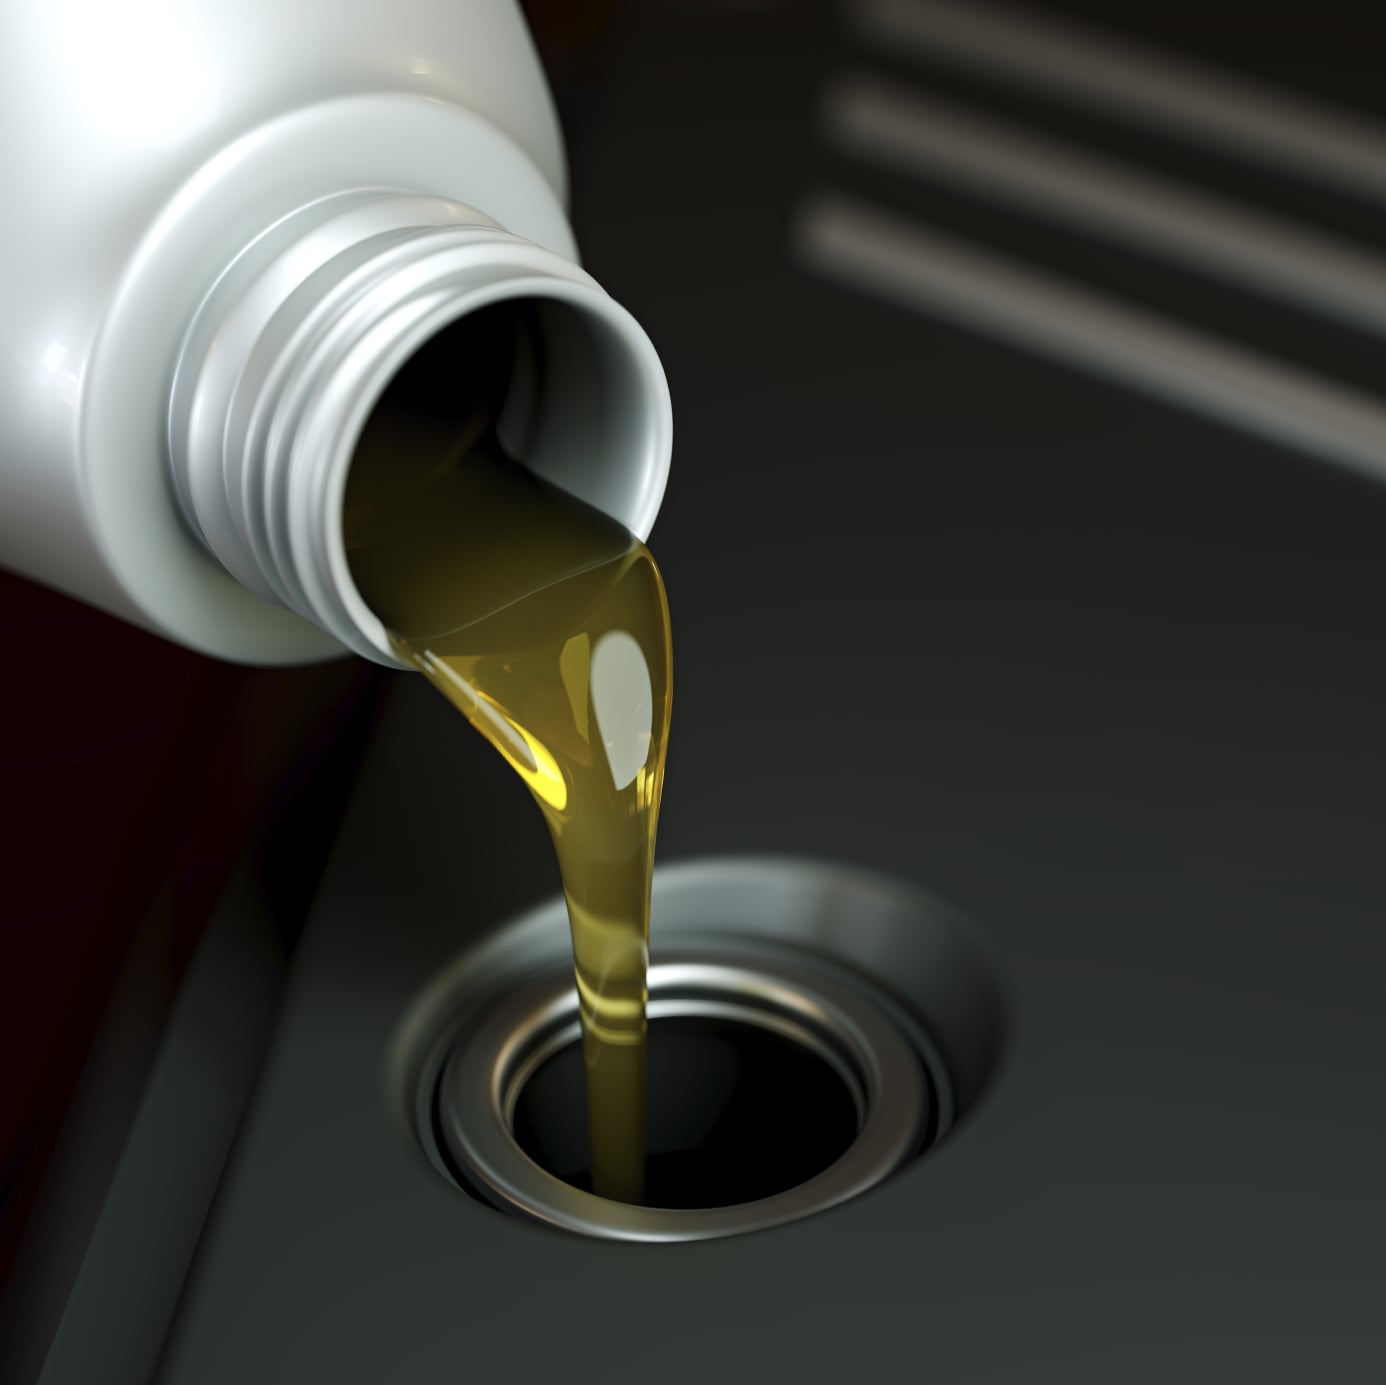 Up close image of motor oil being poured into a car